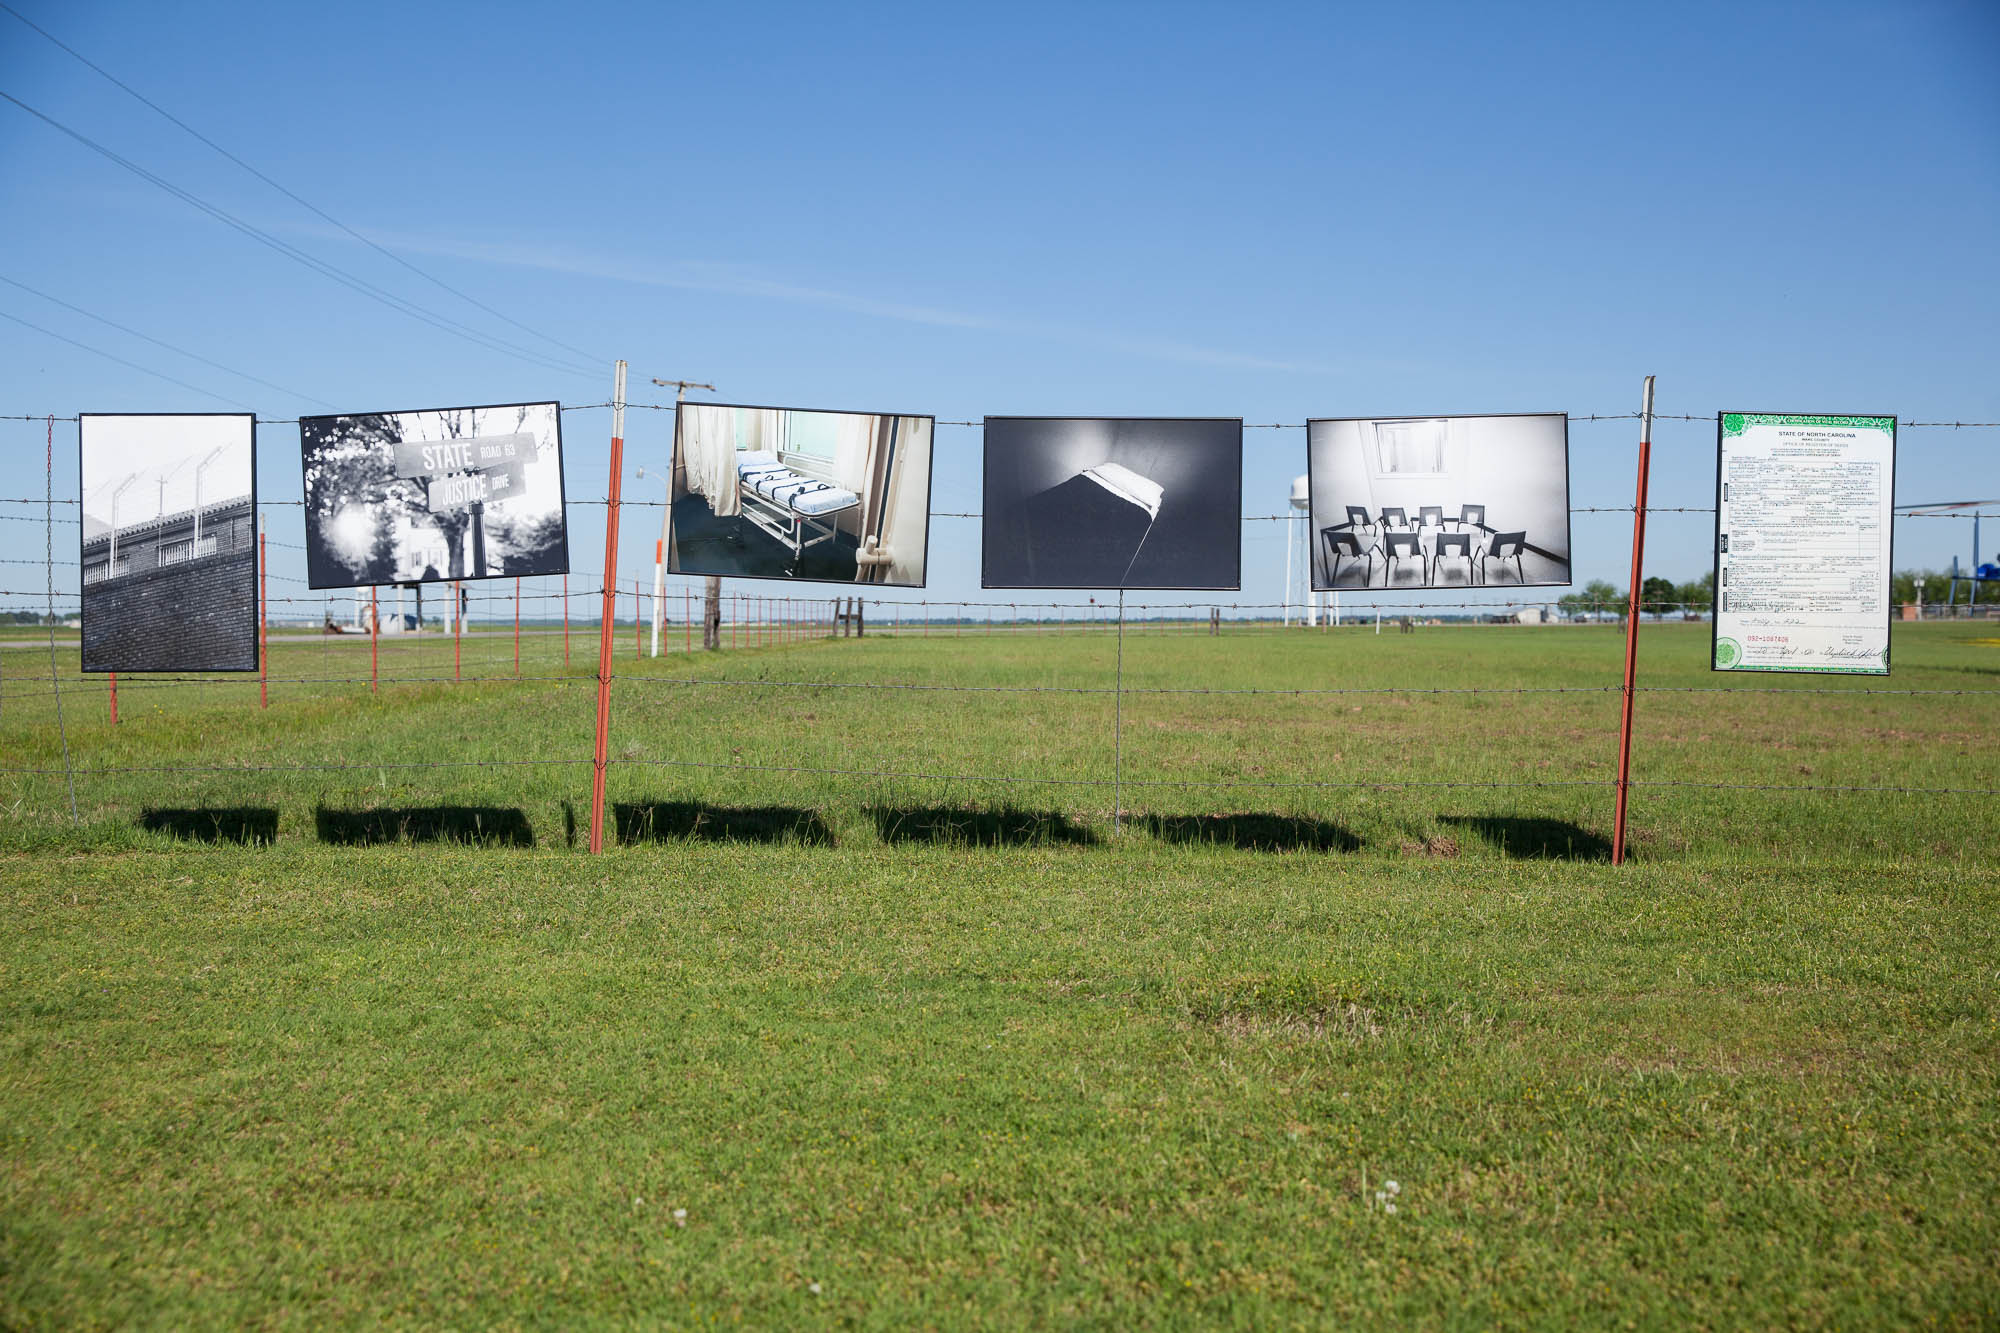 Scott Langley’s death penalty photography exhibit, hanging on barbed wire fencing outside the Arkansas execution facilities.